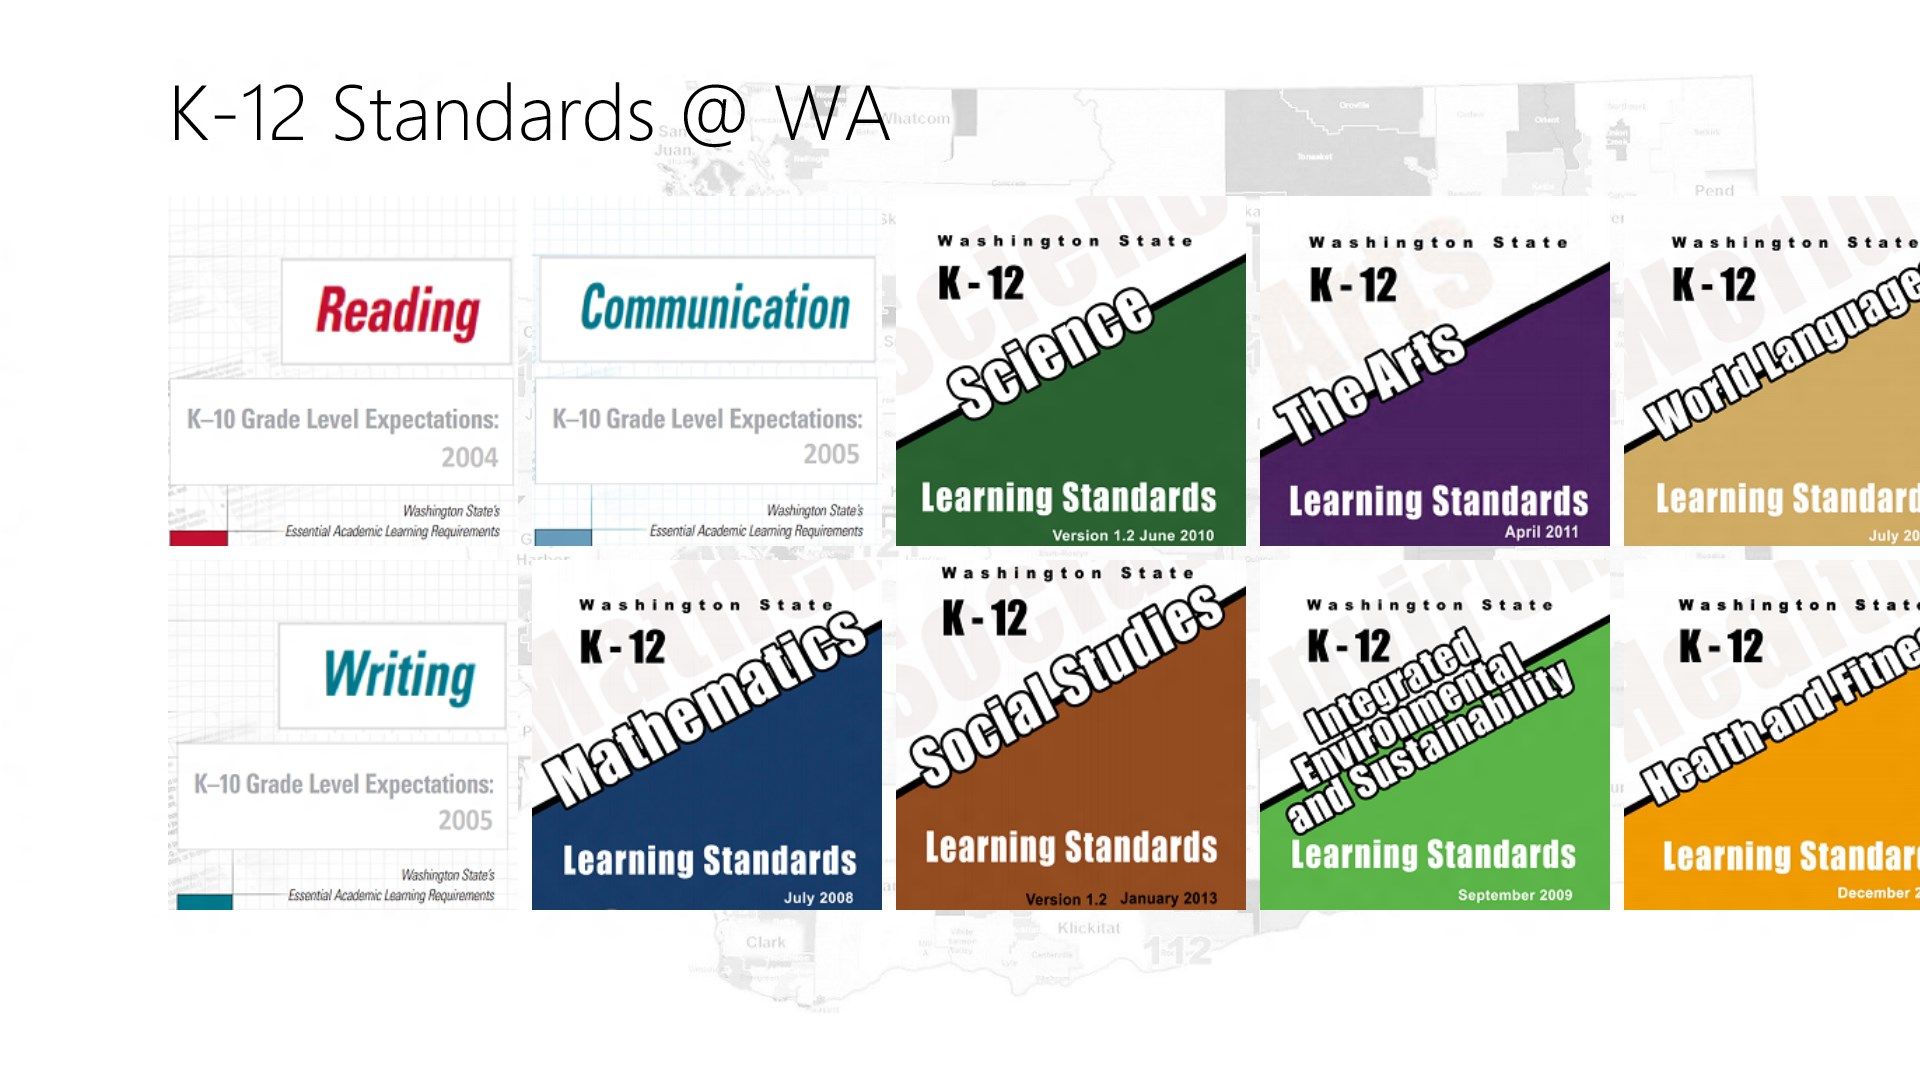 K-12@WA captures detailed requirements in the K-12 education standards in the State of Washington.